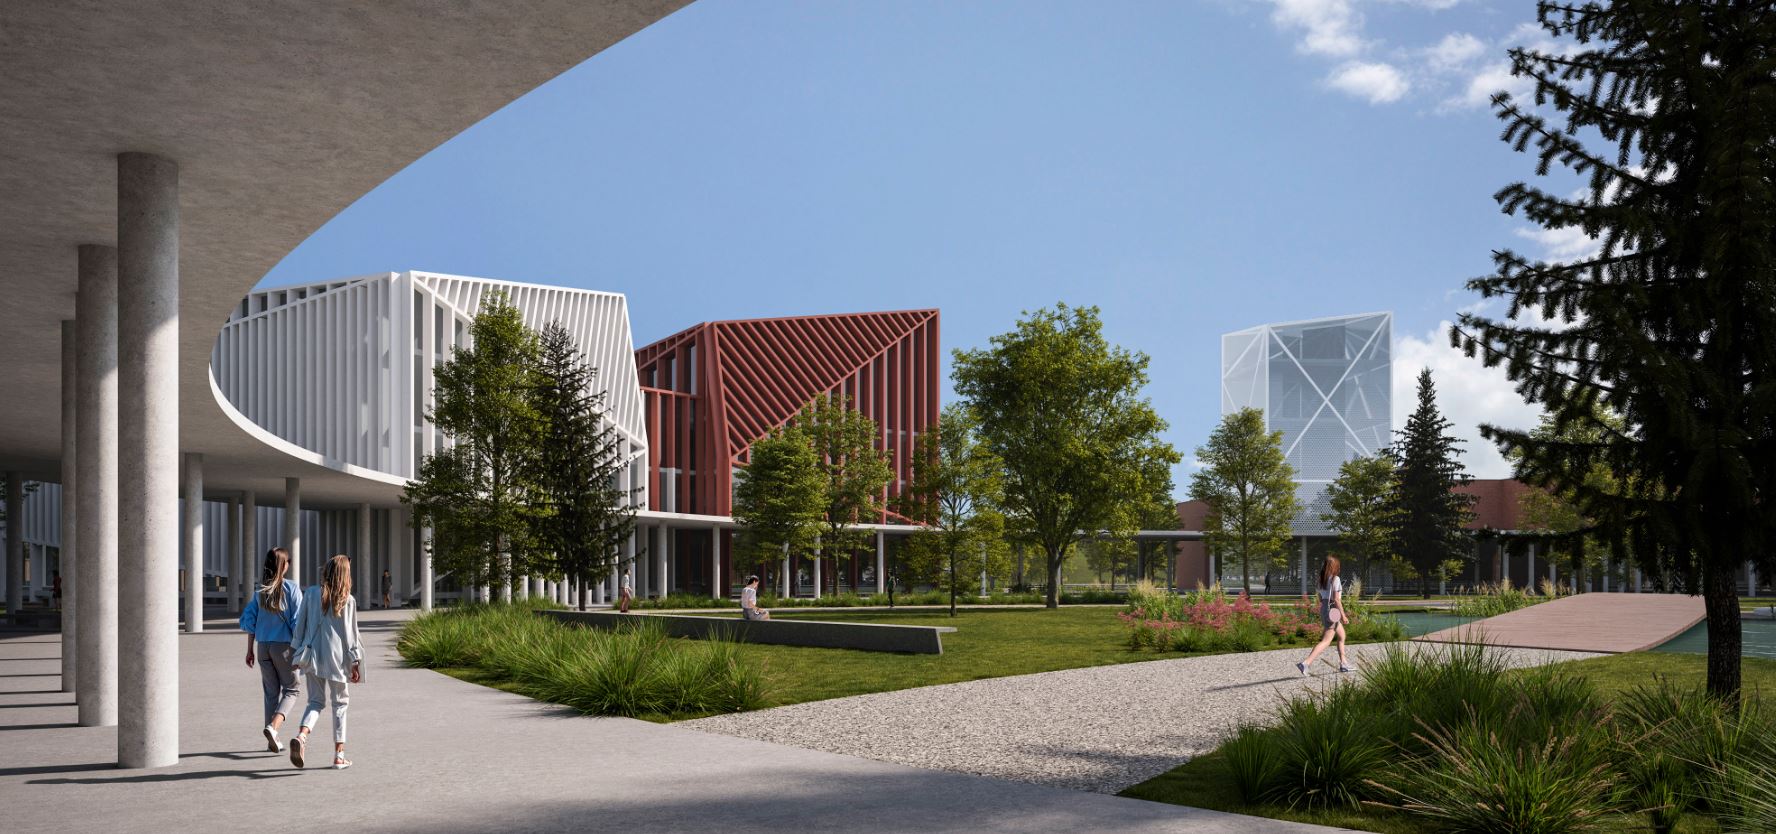 New HUF 30 Billion 'Circular Economy' Science Park To Be Built In Hungary